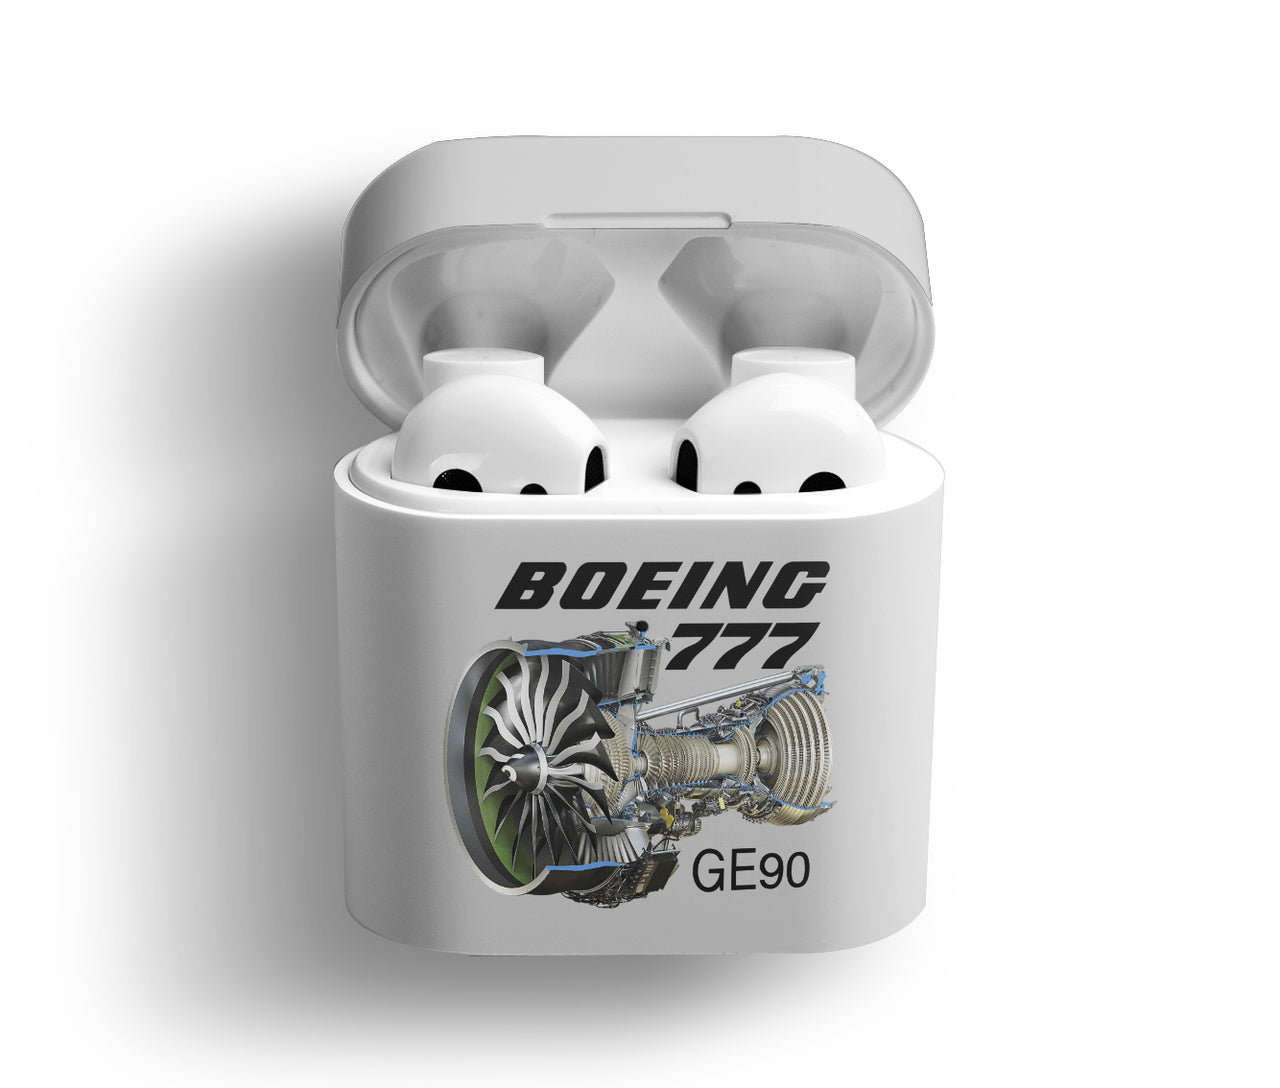 Boeing 777 & GE90 Engine Designed AirPods Cases